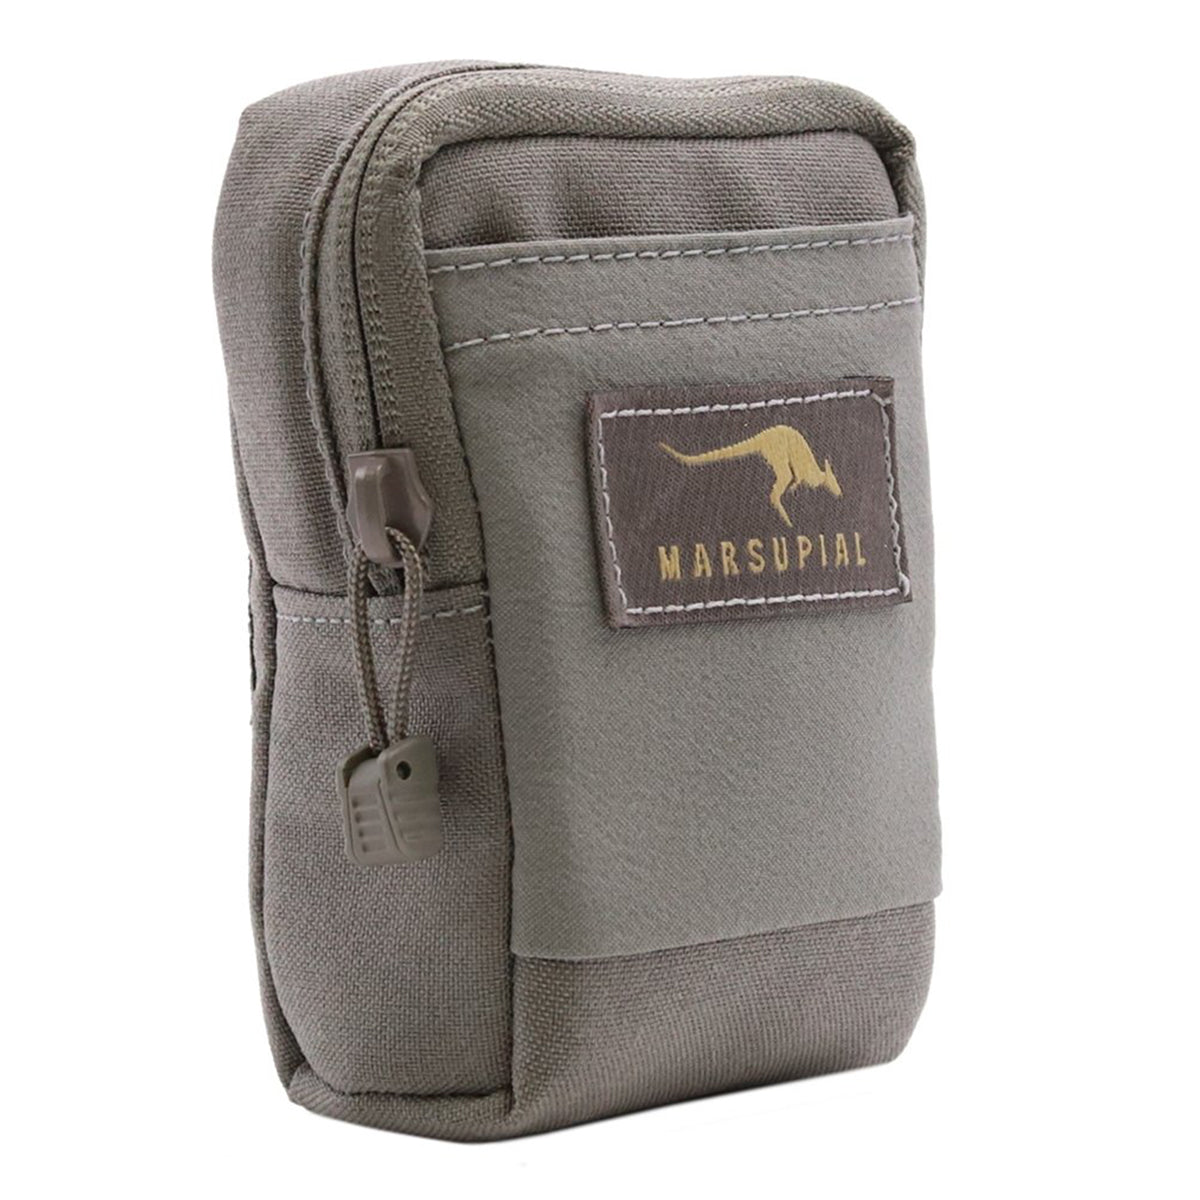 Marsupial Gear Zippered Pouch in Marsupial Gear Small Zippered Pouch by Marsupial Gear | Optics - goHUNT Shop by GOHUNT | Marsupial Gear - GOHUNT Shop